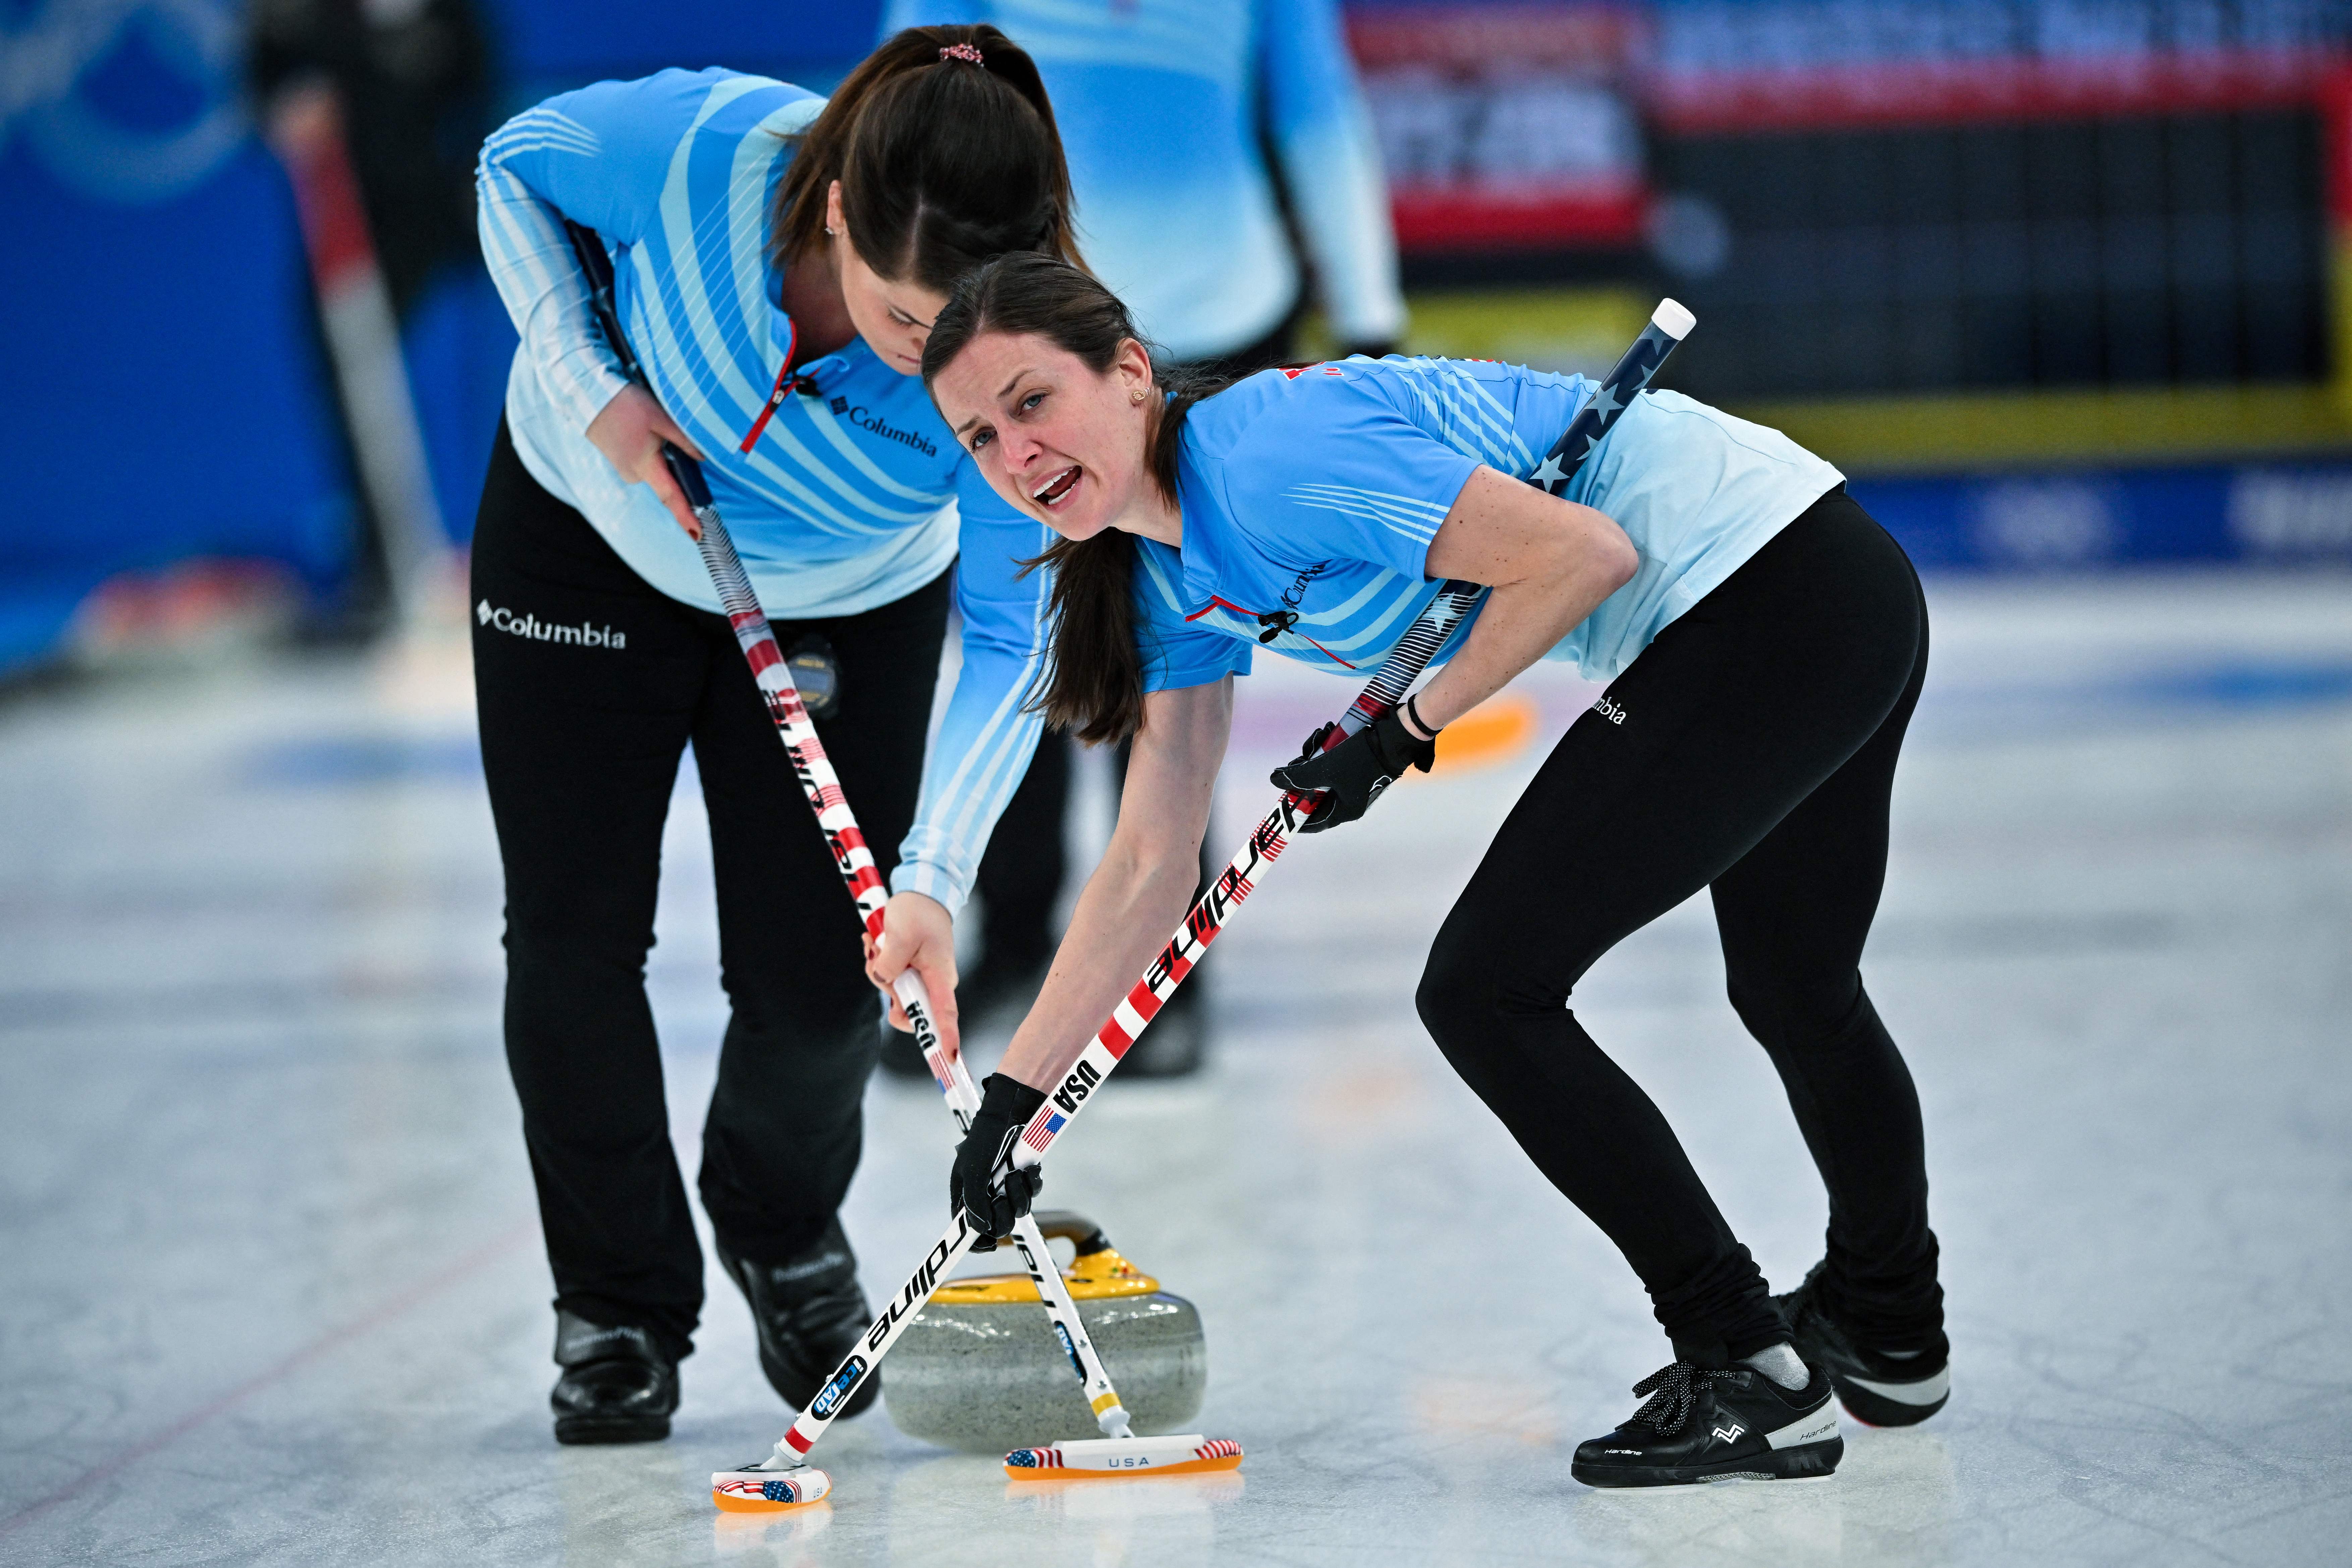 Japan Beats USA in Wednesday Curling Match